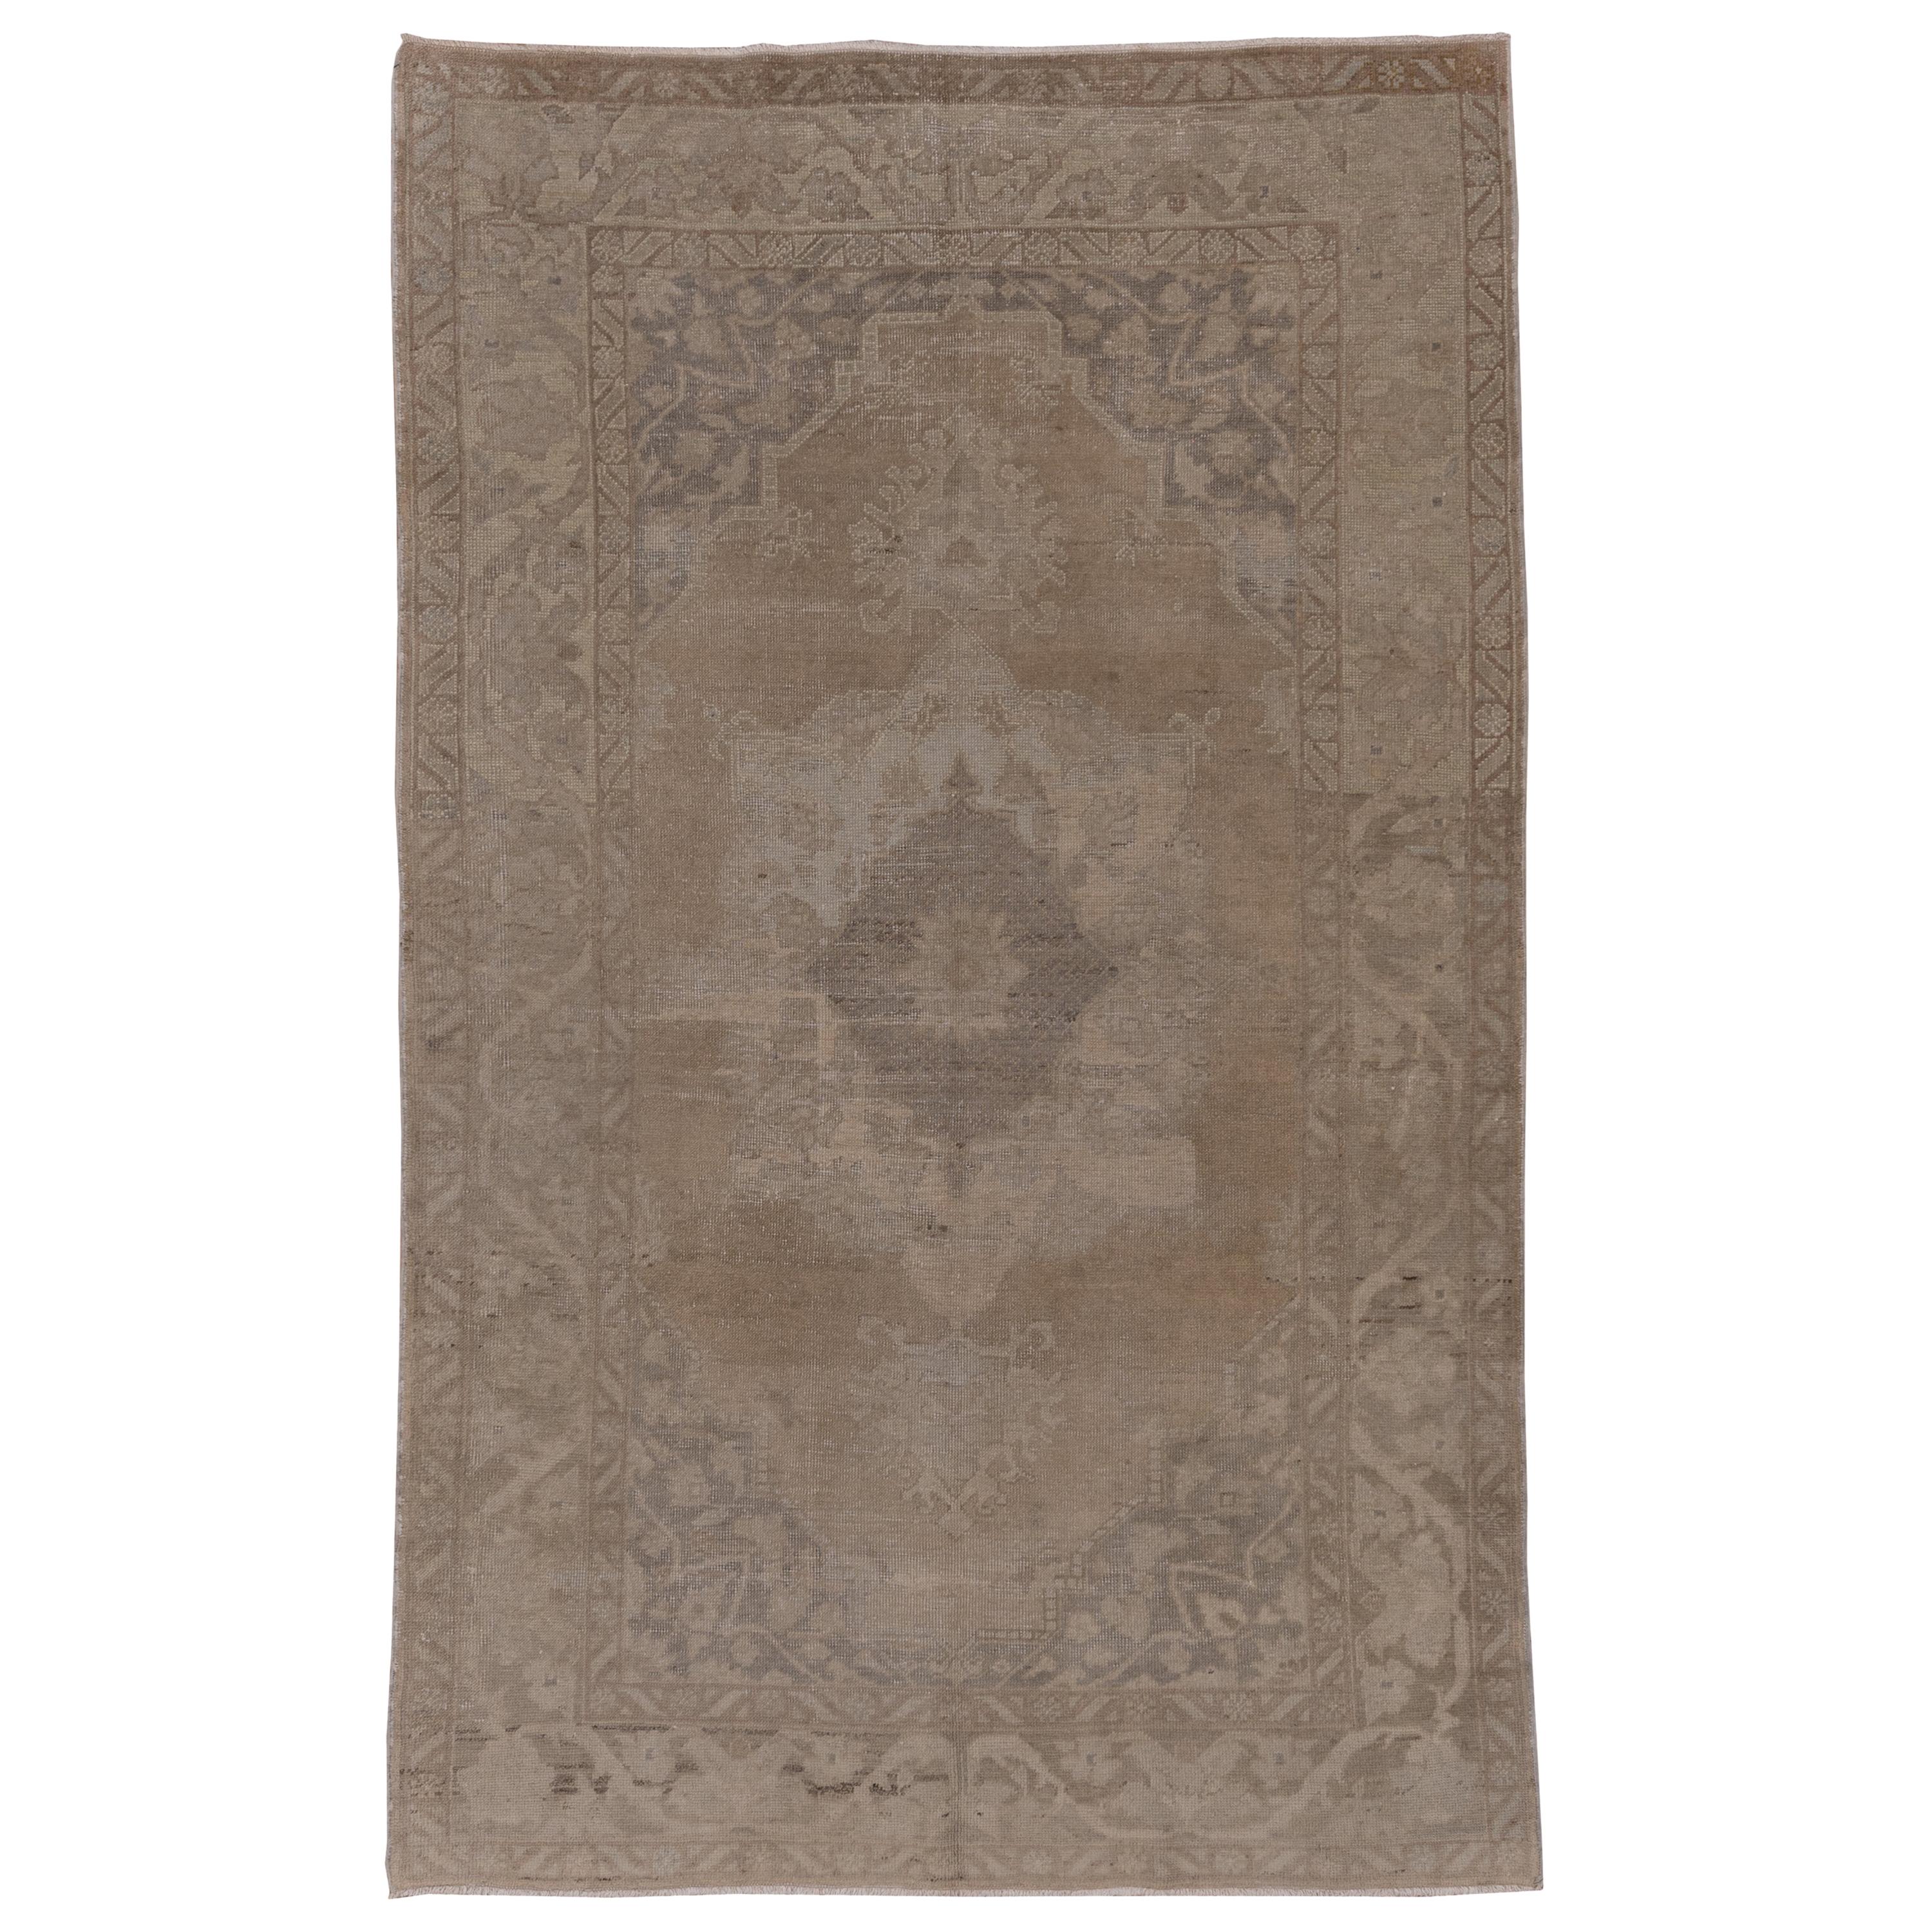 Antique Turkish Oushak Rug with Netural and Gray Tones For Sale